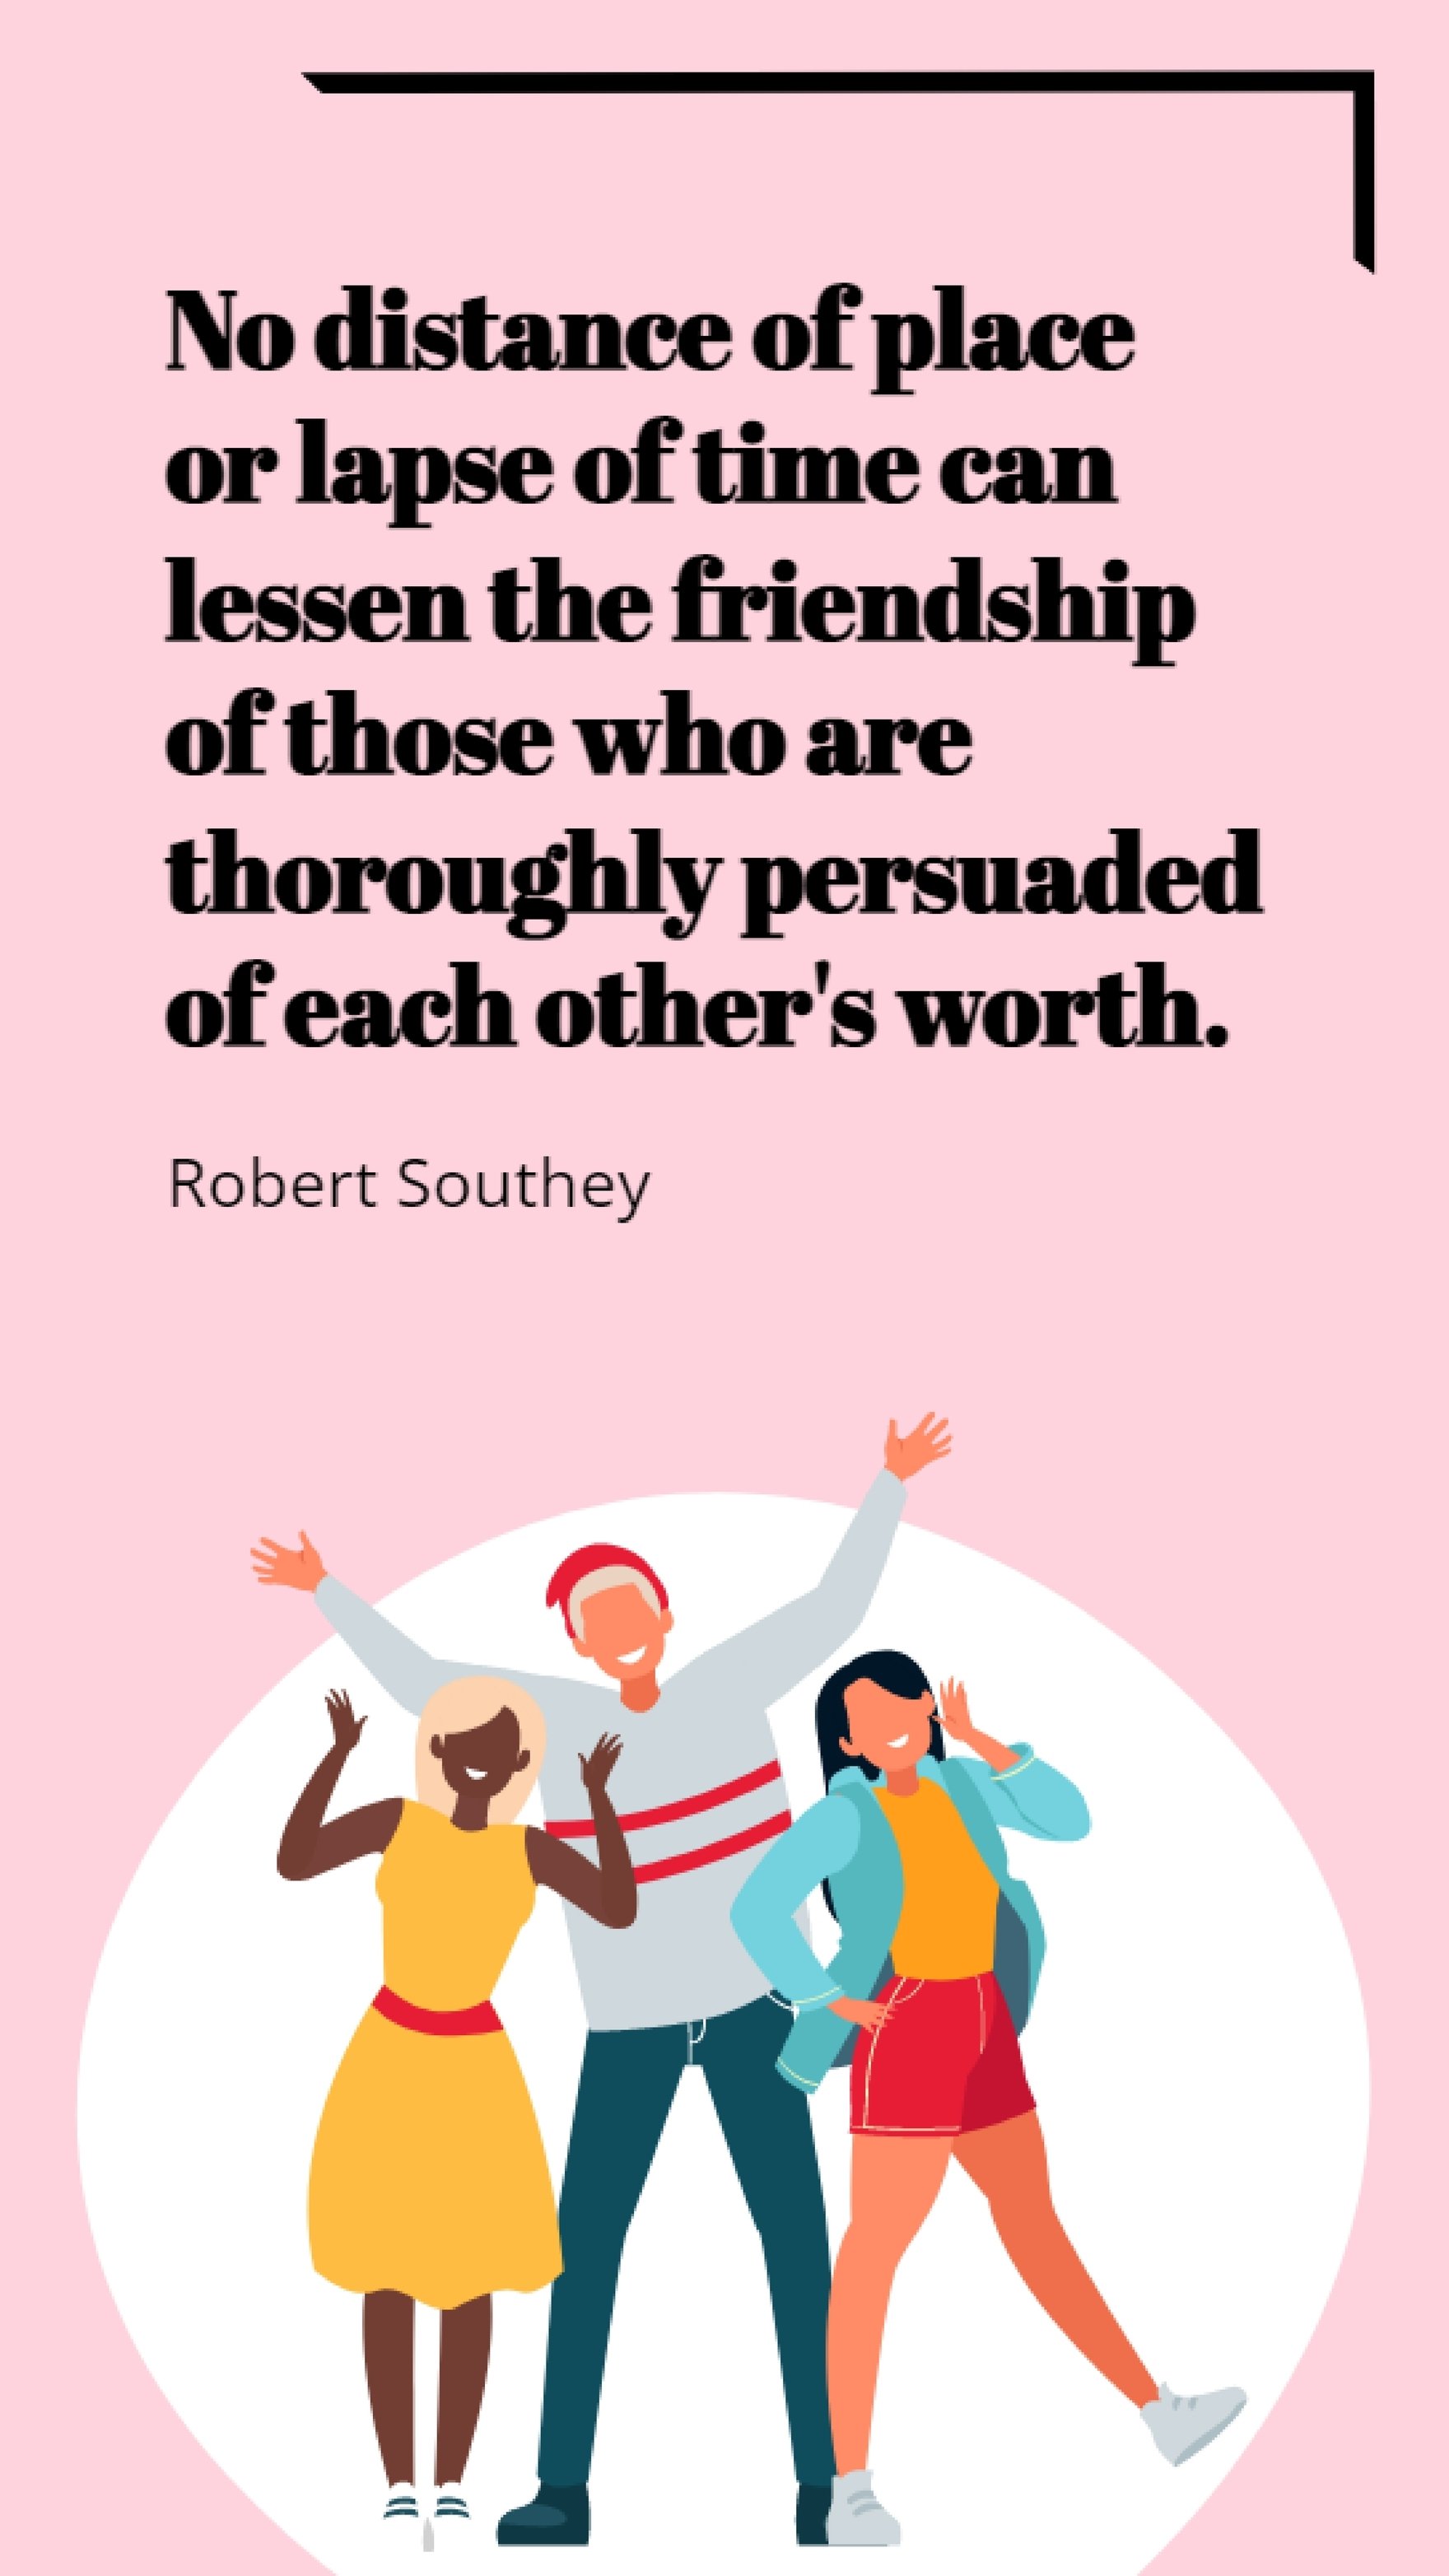 Robert Southey - No distance of place or lapse of time can lessen the friendship of those who are thoroughly persuaded of each other's worth. Template